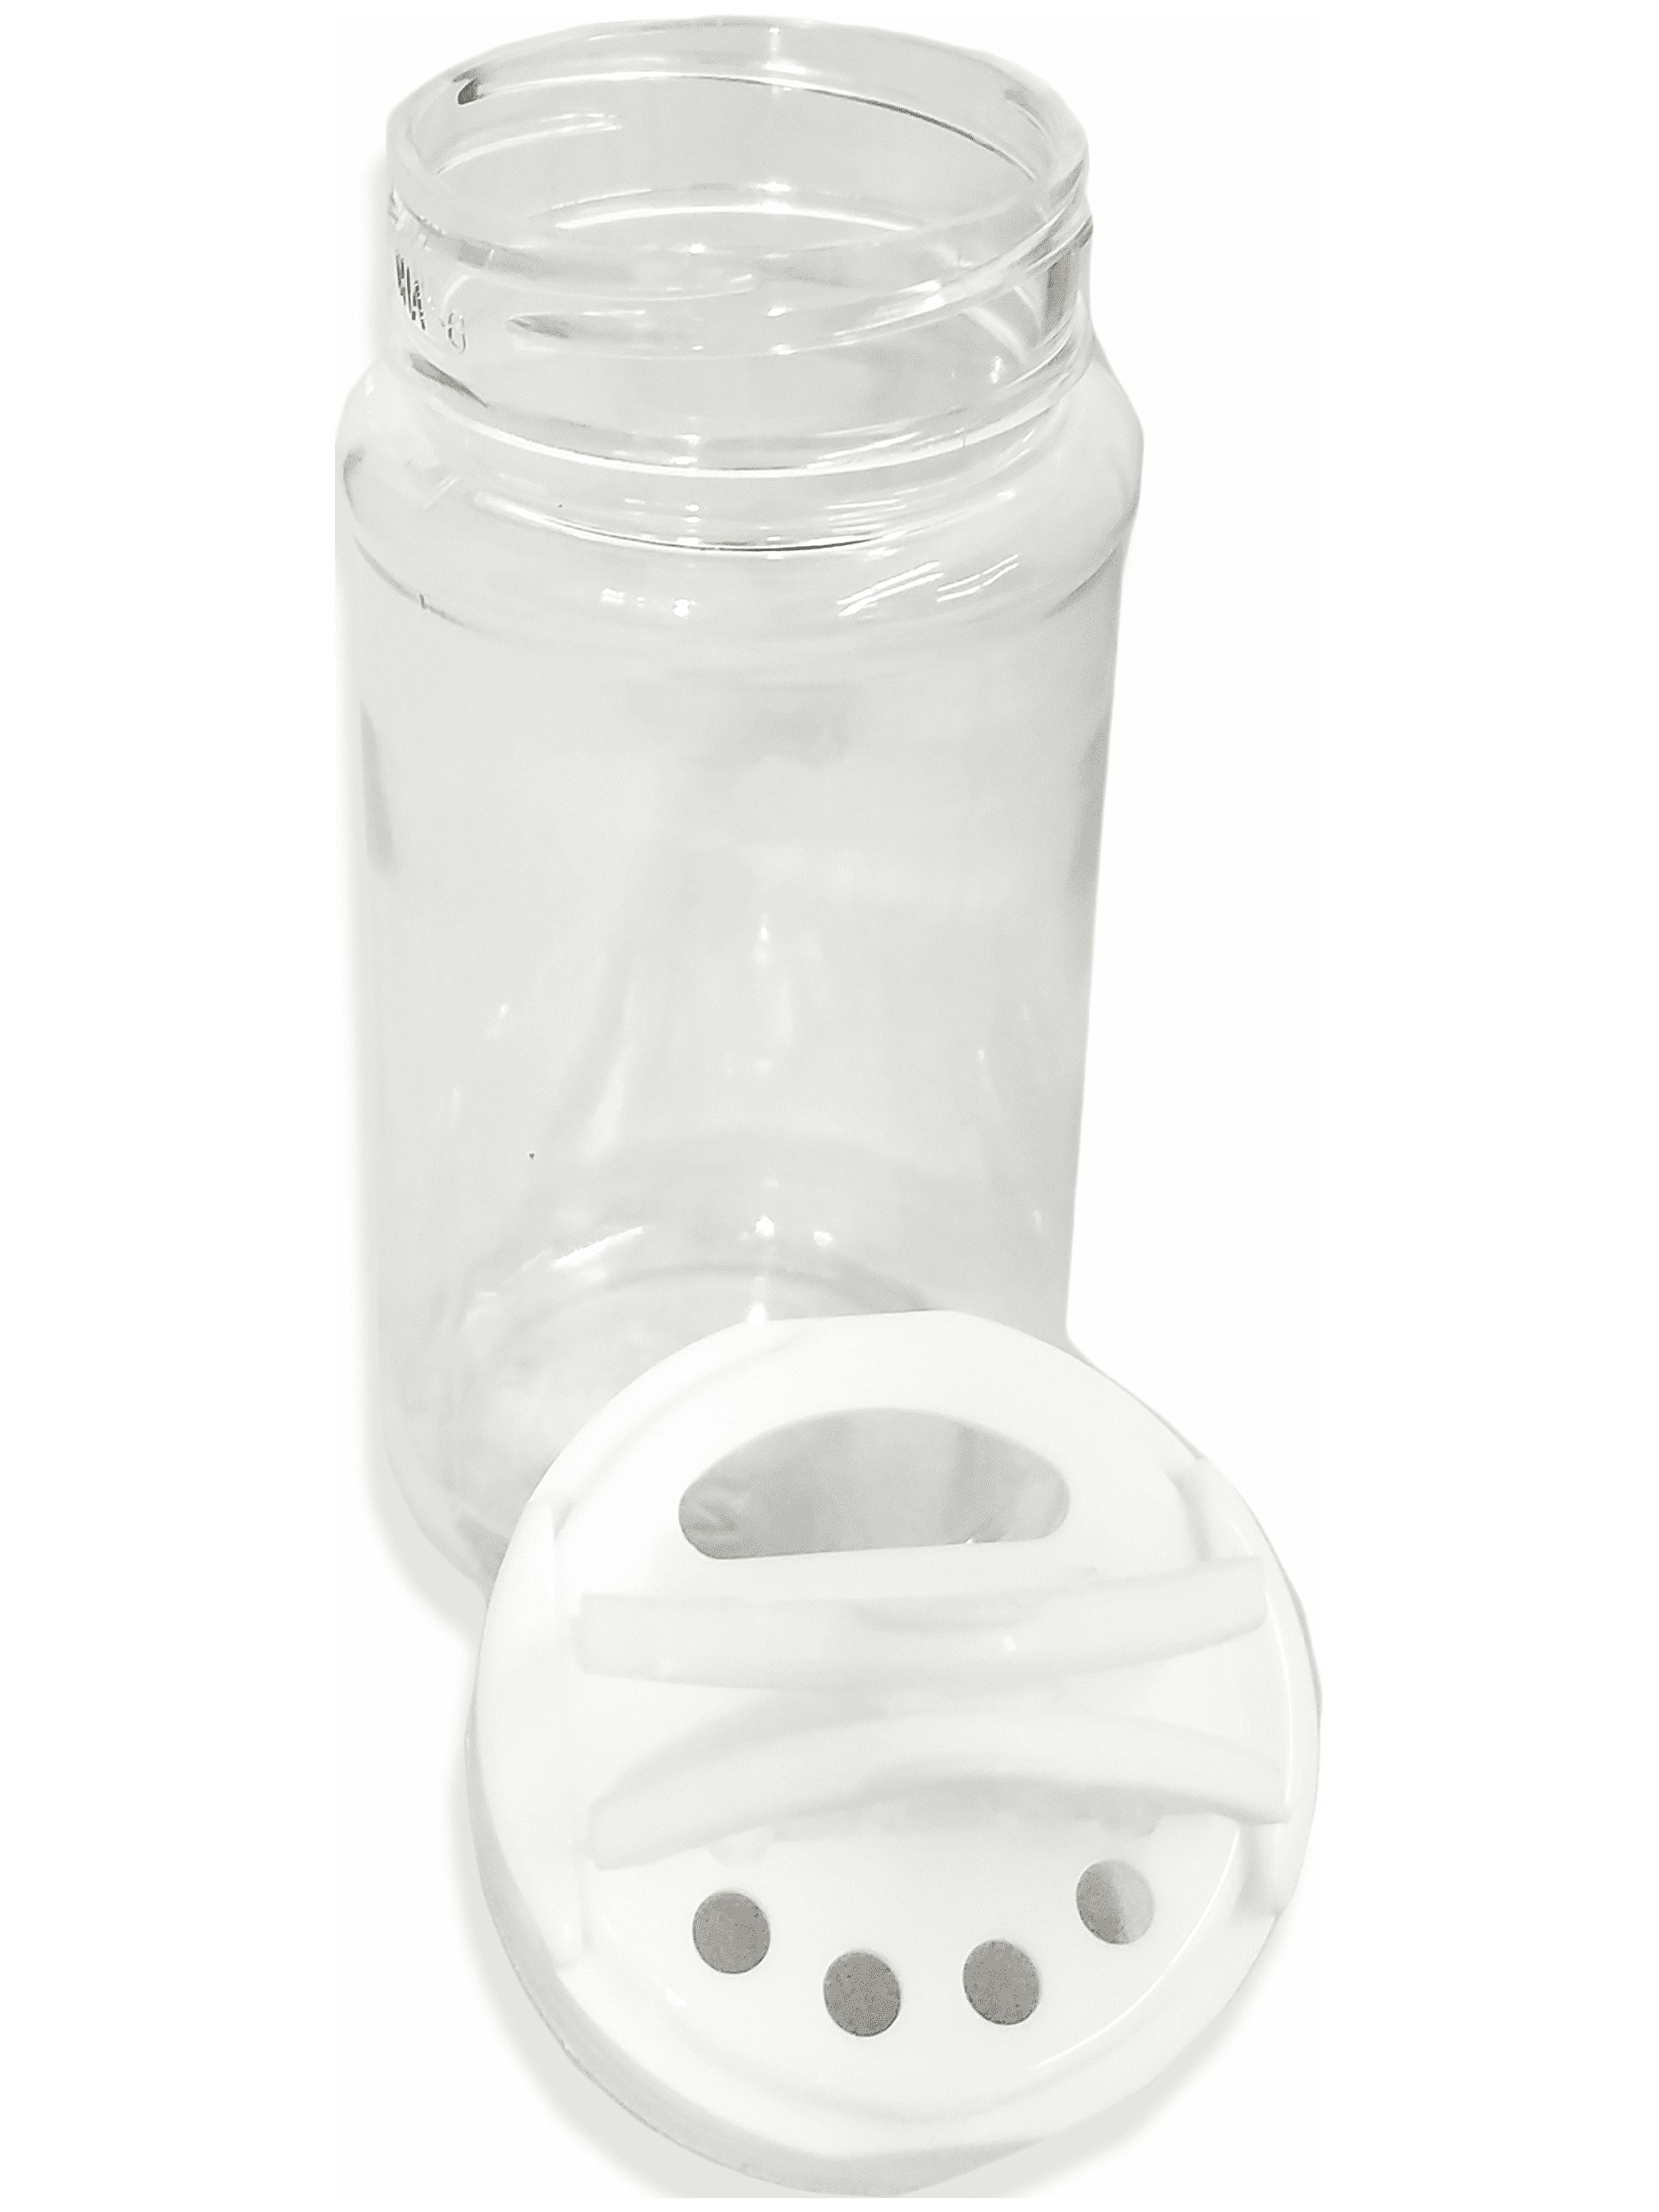 American Metalcraft GLAST2 2 oz. Clear Glass Contemporary Spice Shaker with  Stainless Steel Top and Slotted